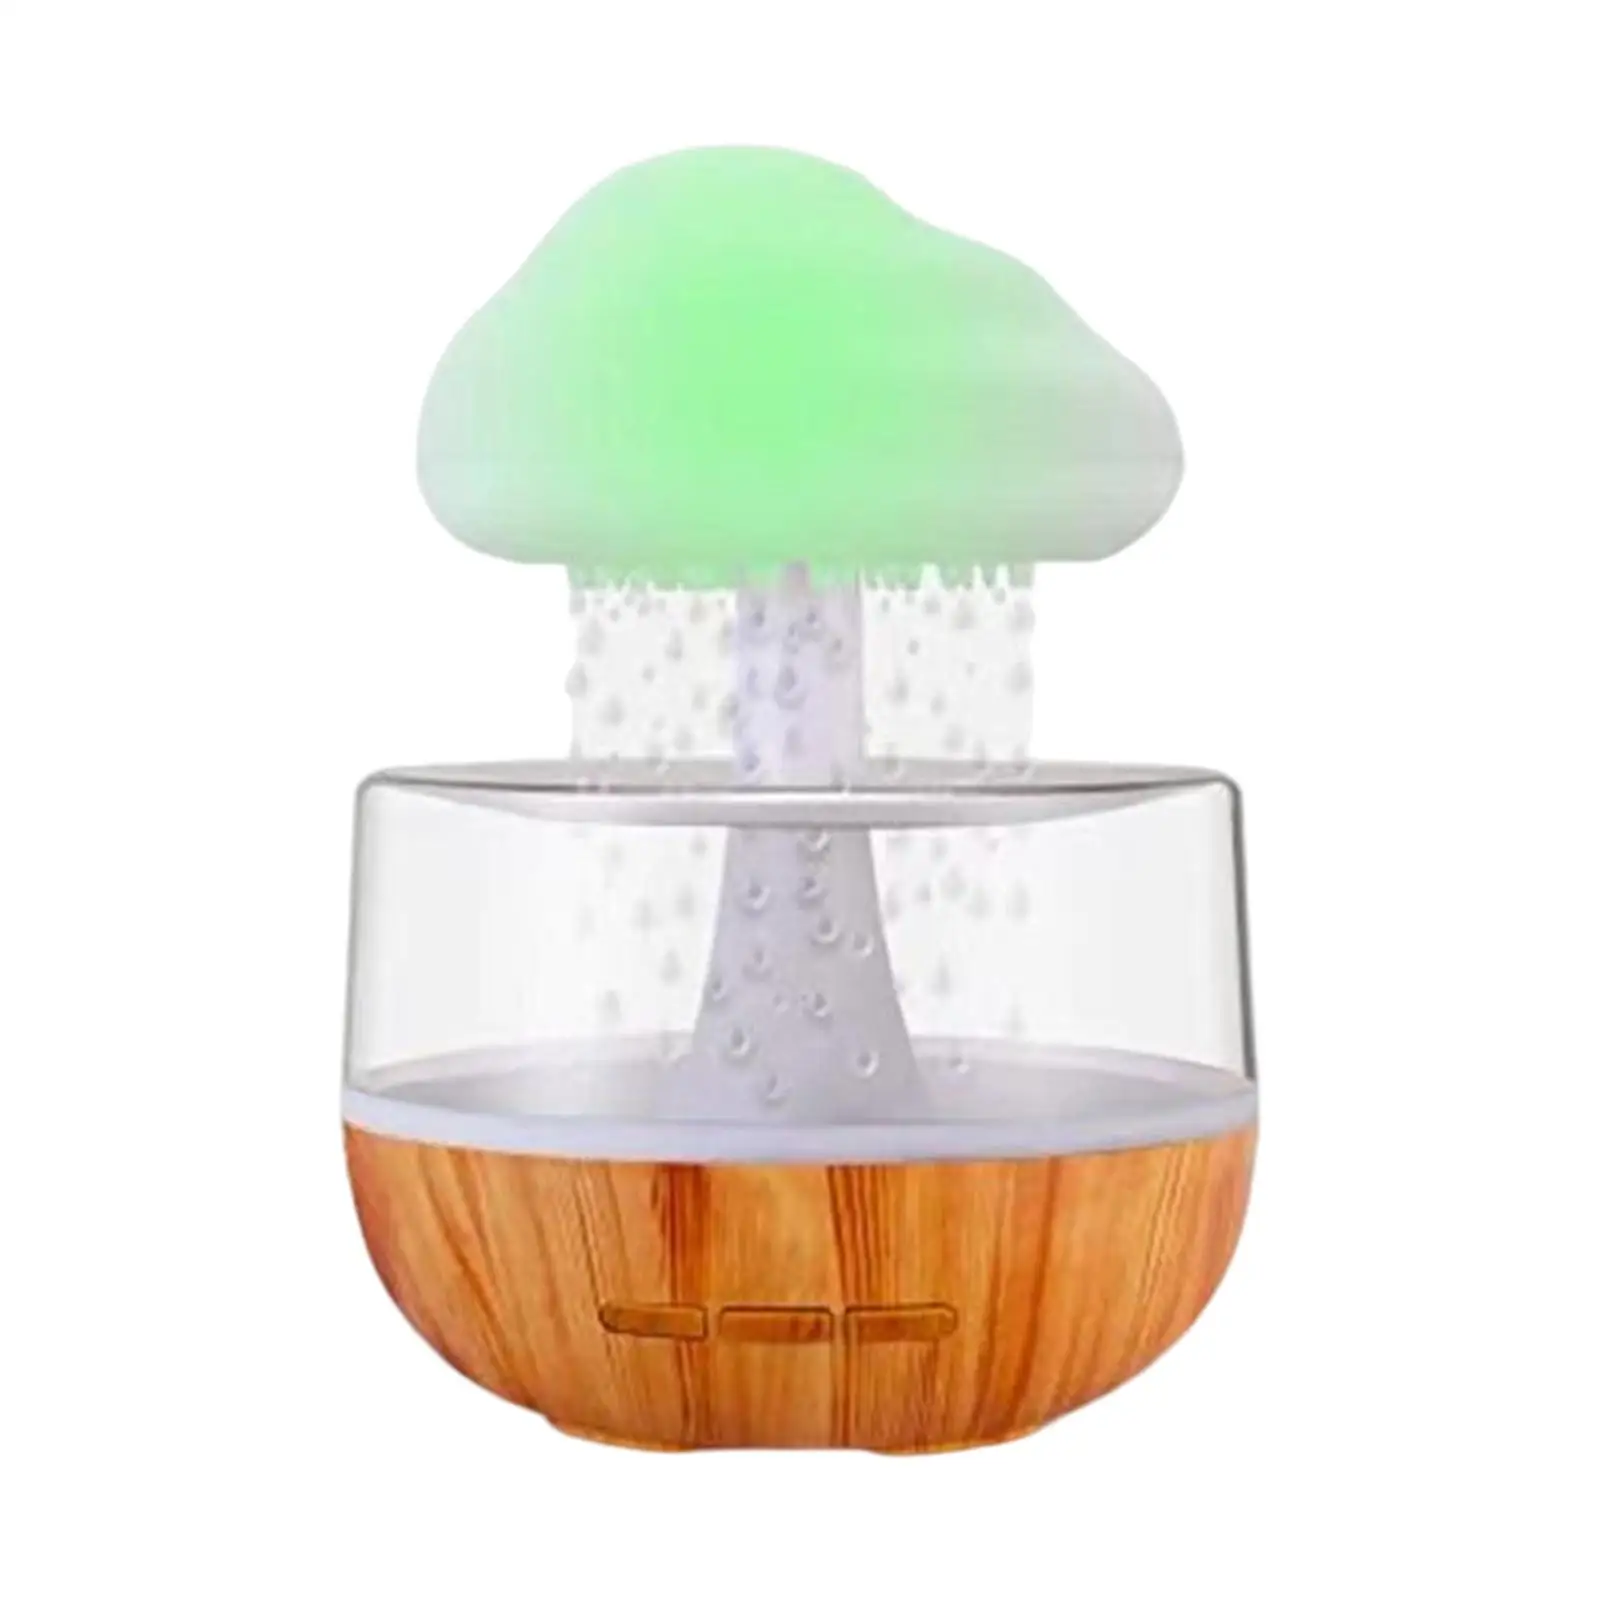 Humidifier Atmosphere Light Spill Resistant Design USB Cable Cloud Raindrop Humidifier 7 Changing Colors Lights for Bedroom